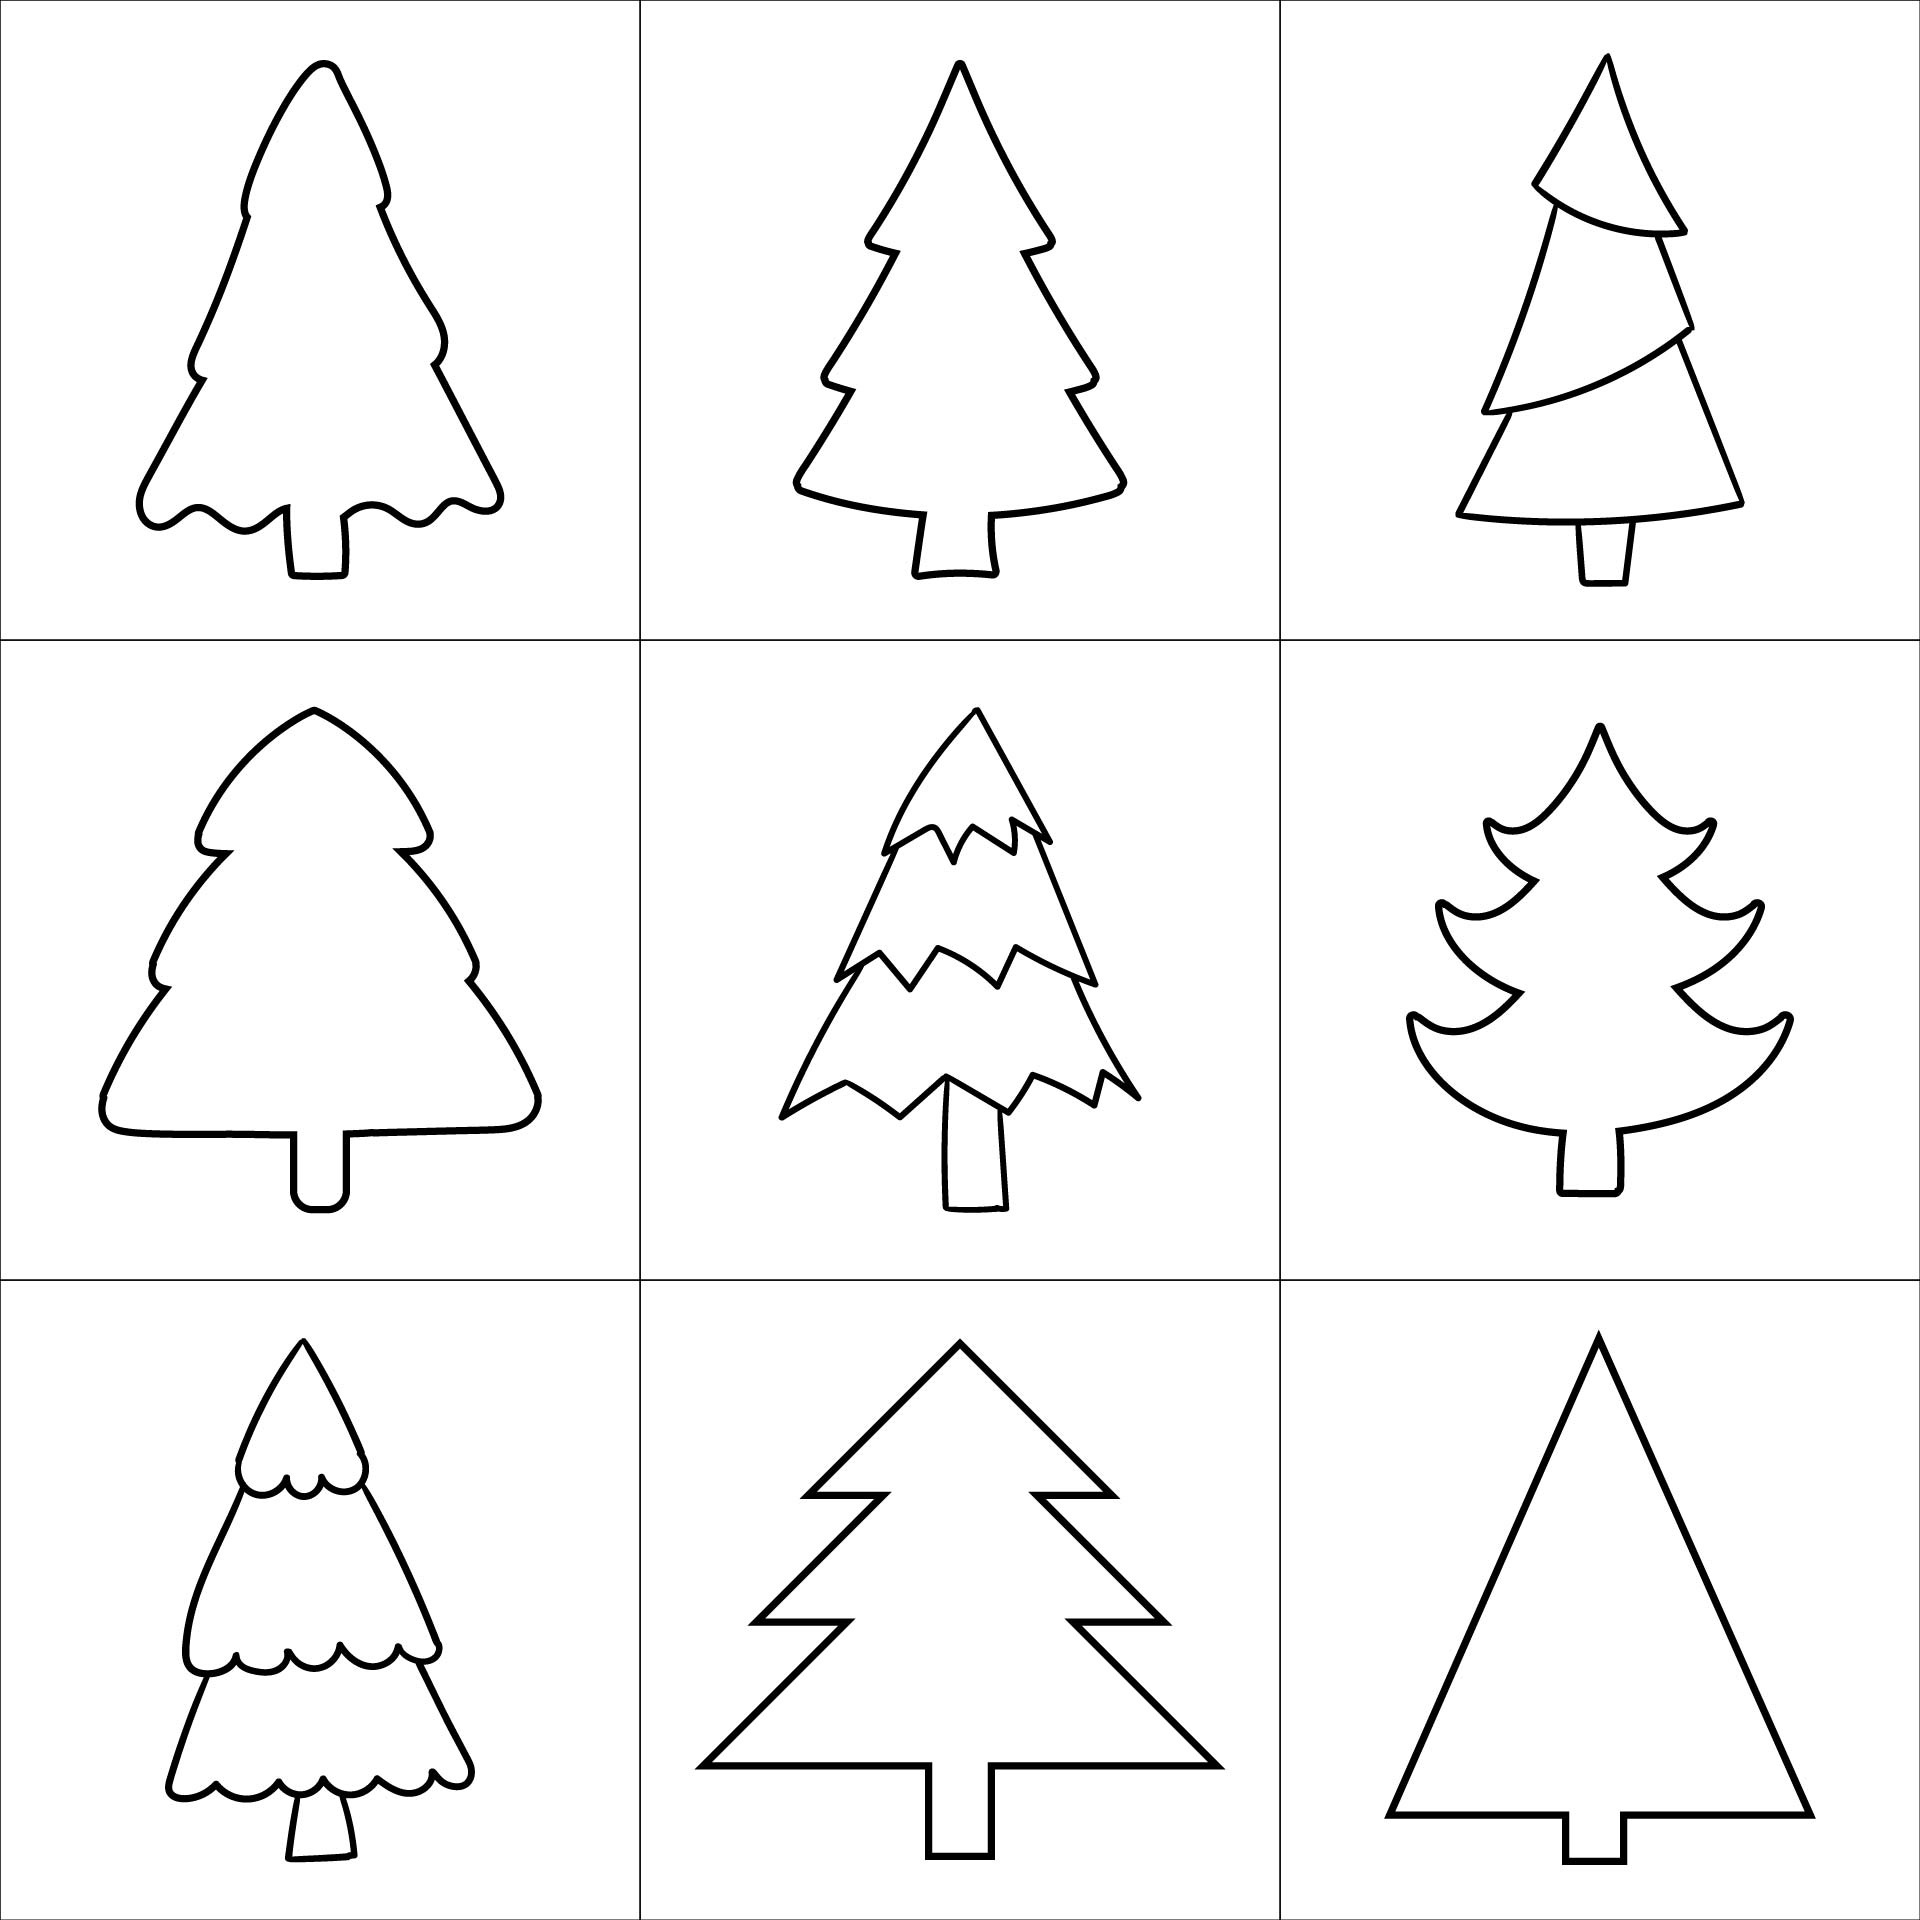 Printable Christmas Tree Templates In All Shapes And Sizes